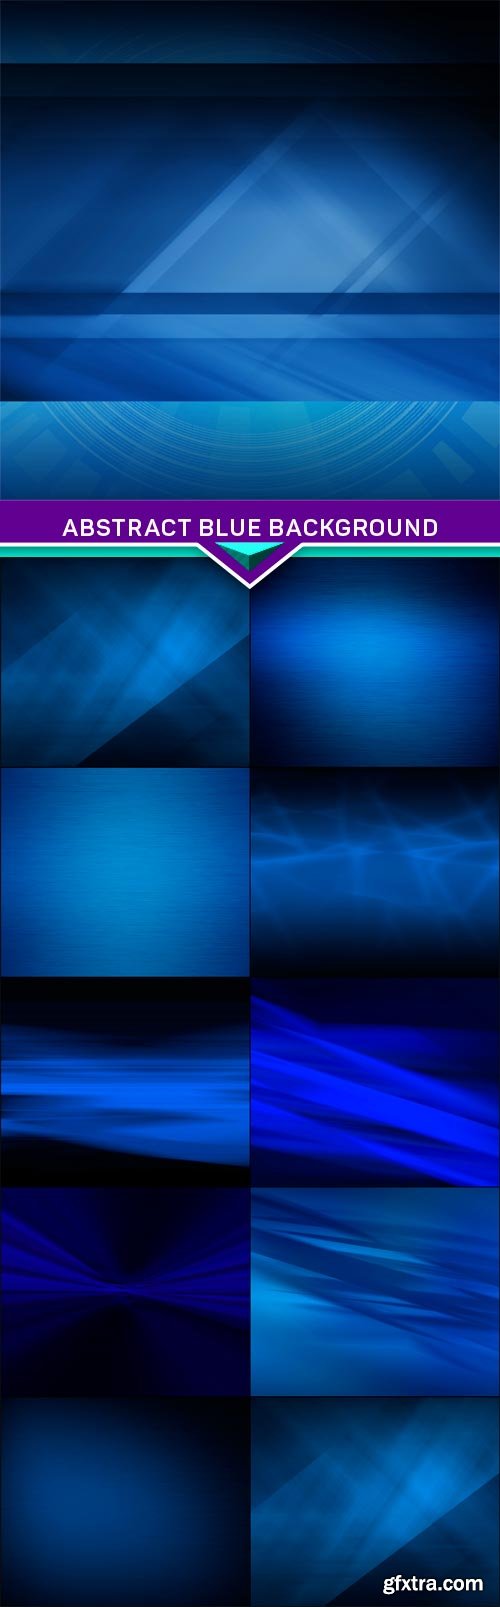 Abstract blue background 10X JPEG